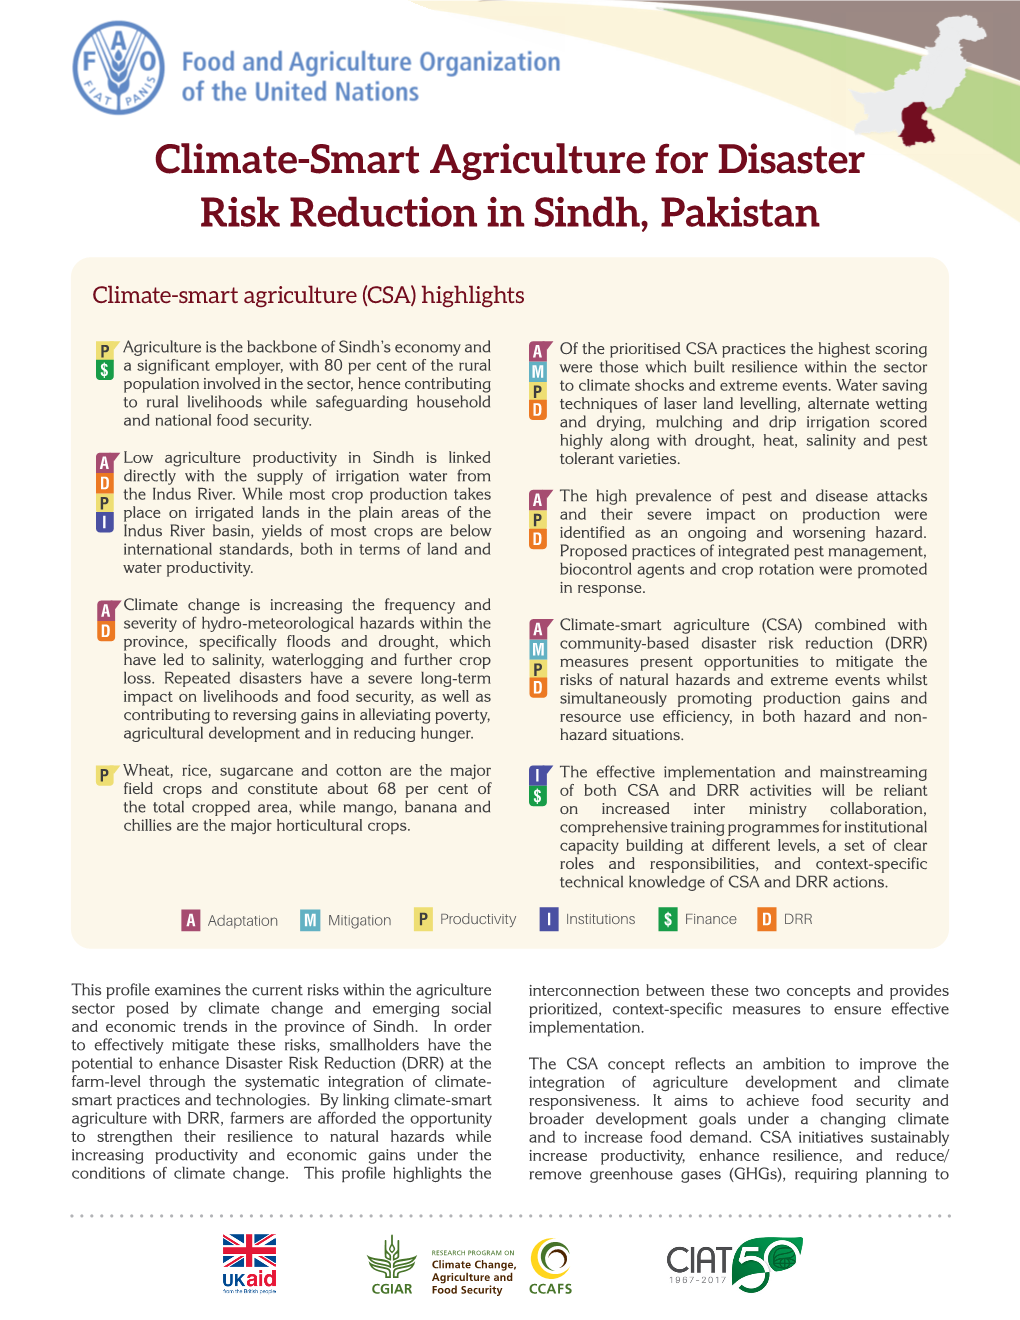 Climate-Smart Agriculture for Disaster Risk Reduction in Sindh, Pakistan